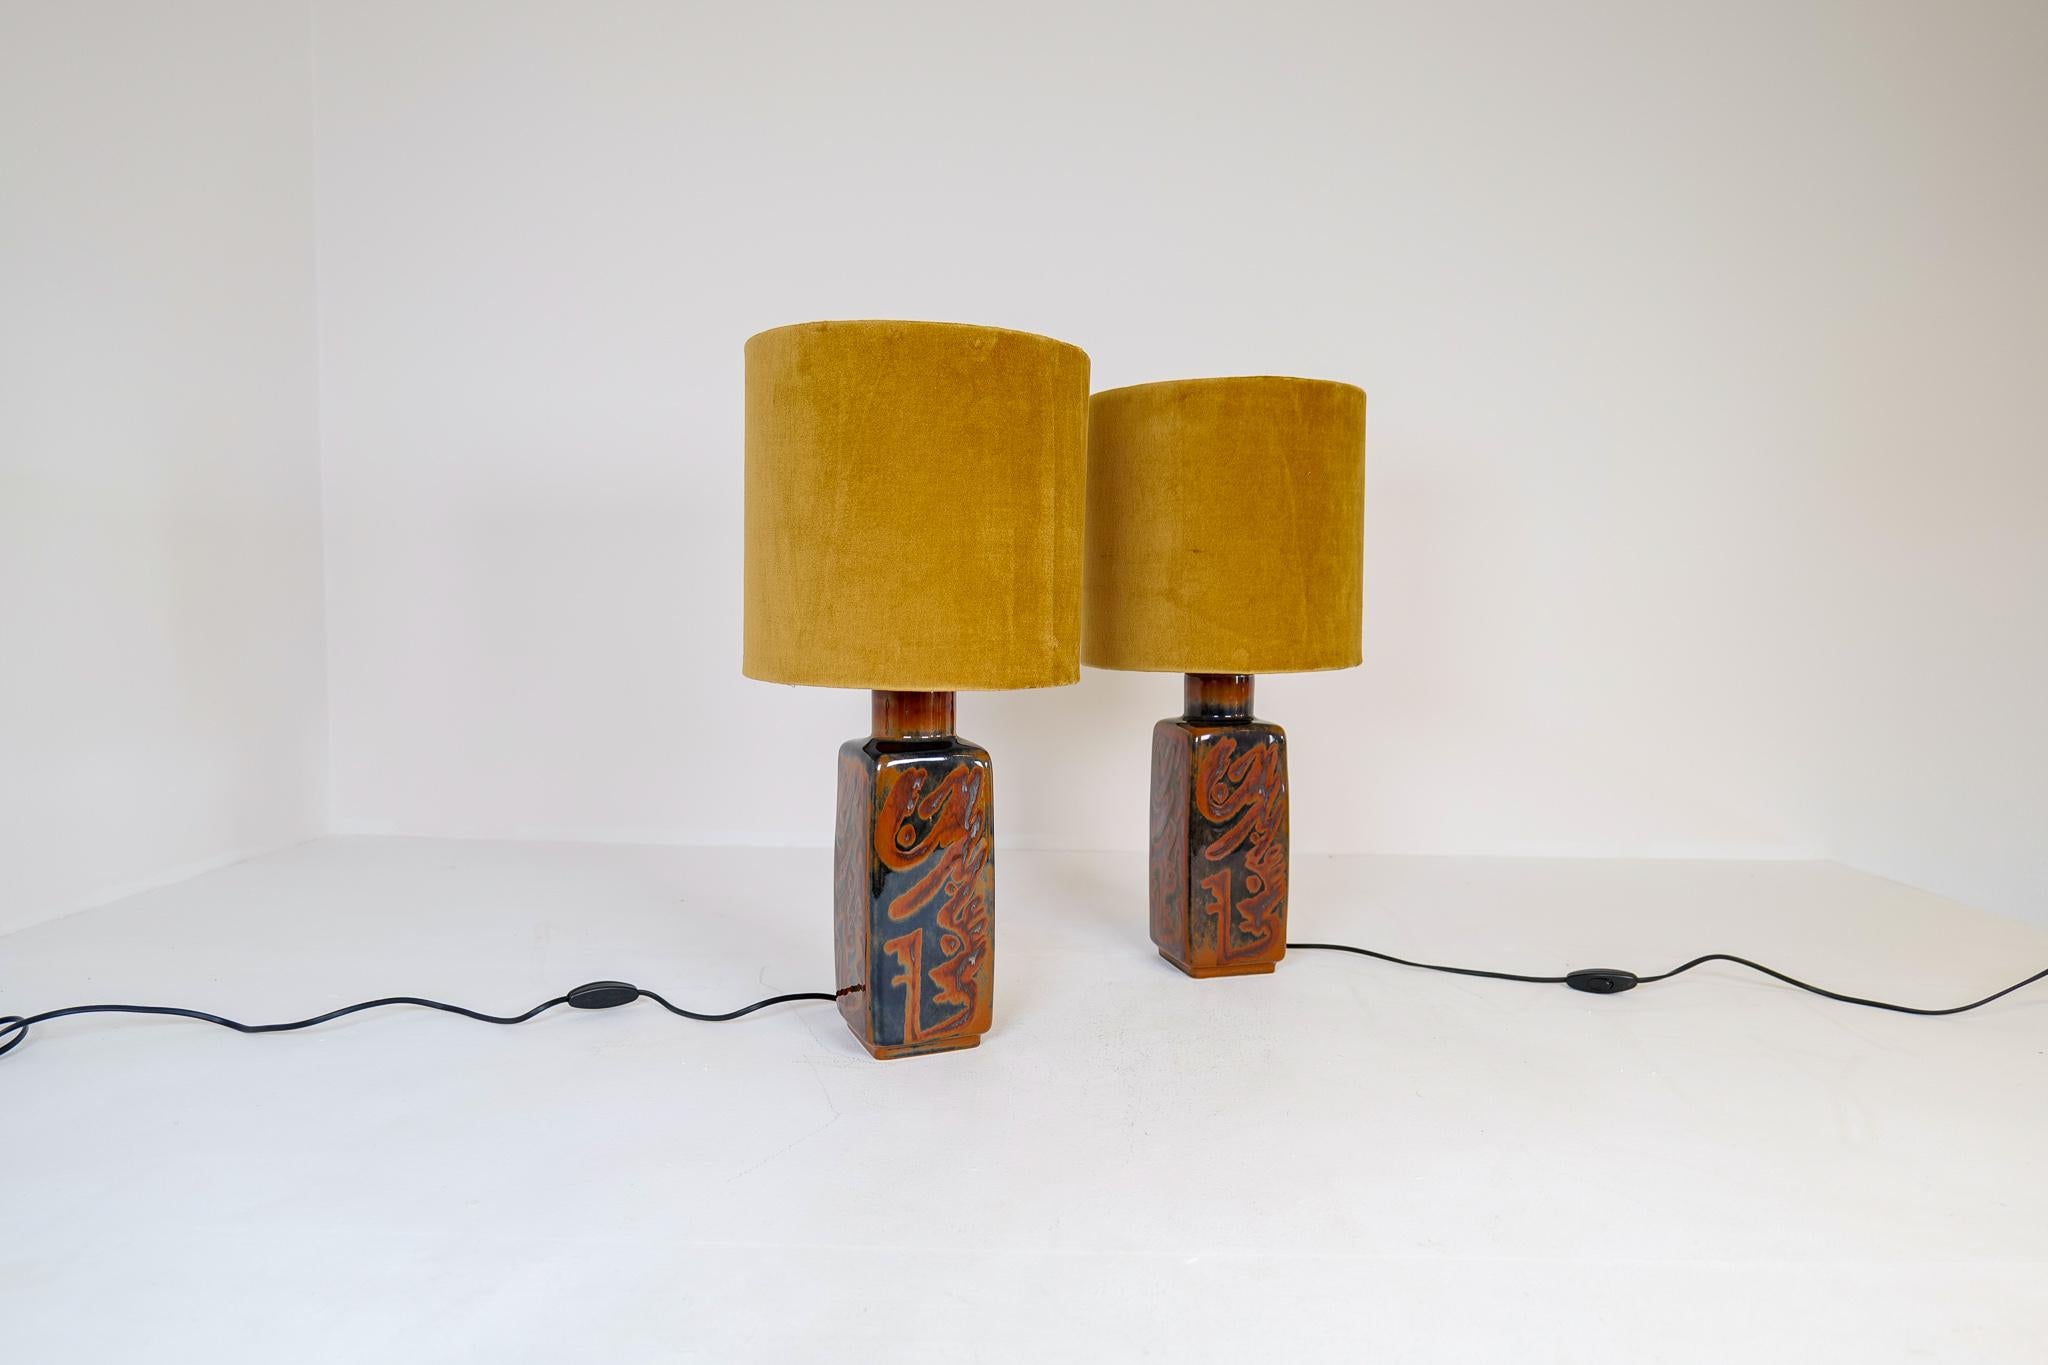 Handmade and hand decorated signed and glazed ceramic table lamp by designer Carl Harry Stålhane and made in Sweden for Rörstrand in the 1960s.

Rectangular shape with hand painted multicolored earth tone abstract Middle Eastern inspired designs